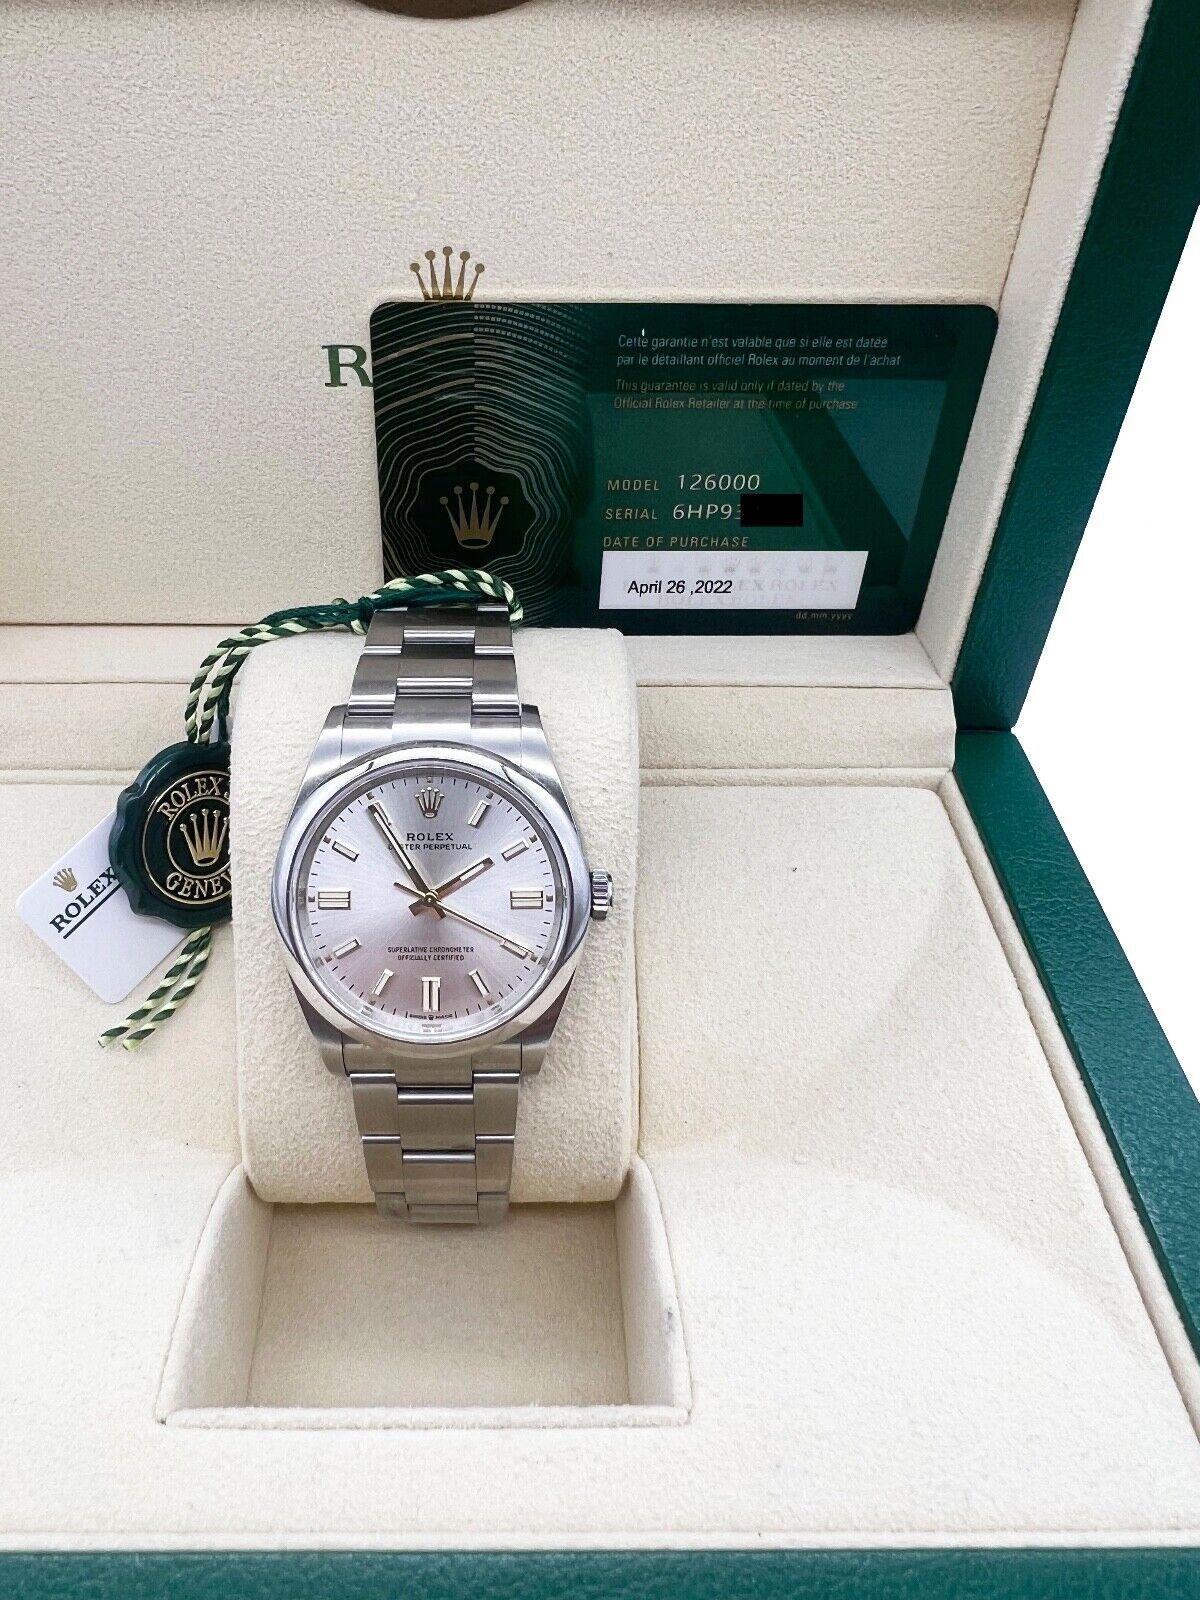 Style Number: 126000

Serial: 6HP93***

Year: 2022

Model: Oyster Perpetual

Case Material: Stainless Steel 

Band: Stainless Steel 

Bezel: Stainless Steel 

Dial: Silver

Face: Sapphire Crystal

Case Size: 36mm

Includes: 

-Rolex Box &